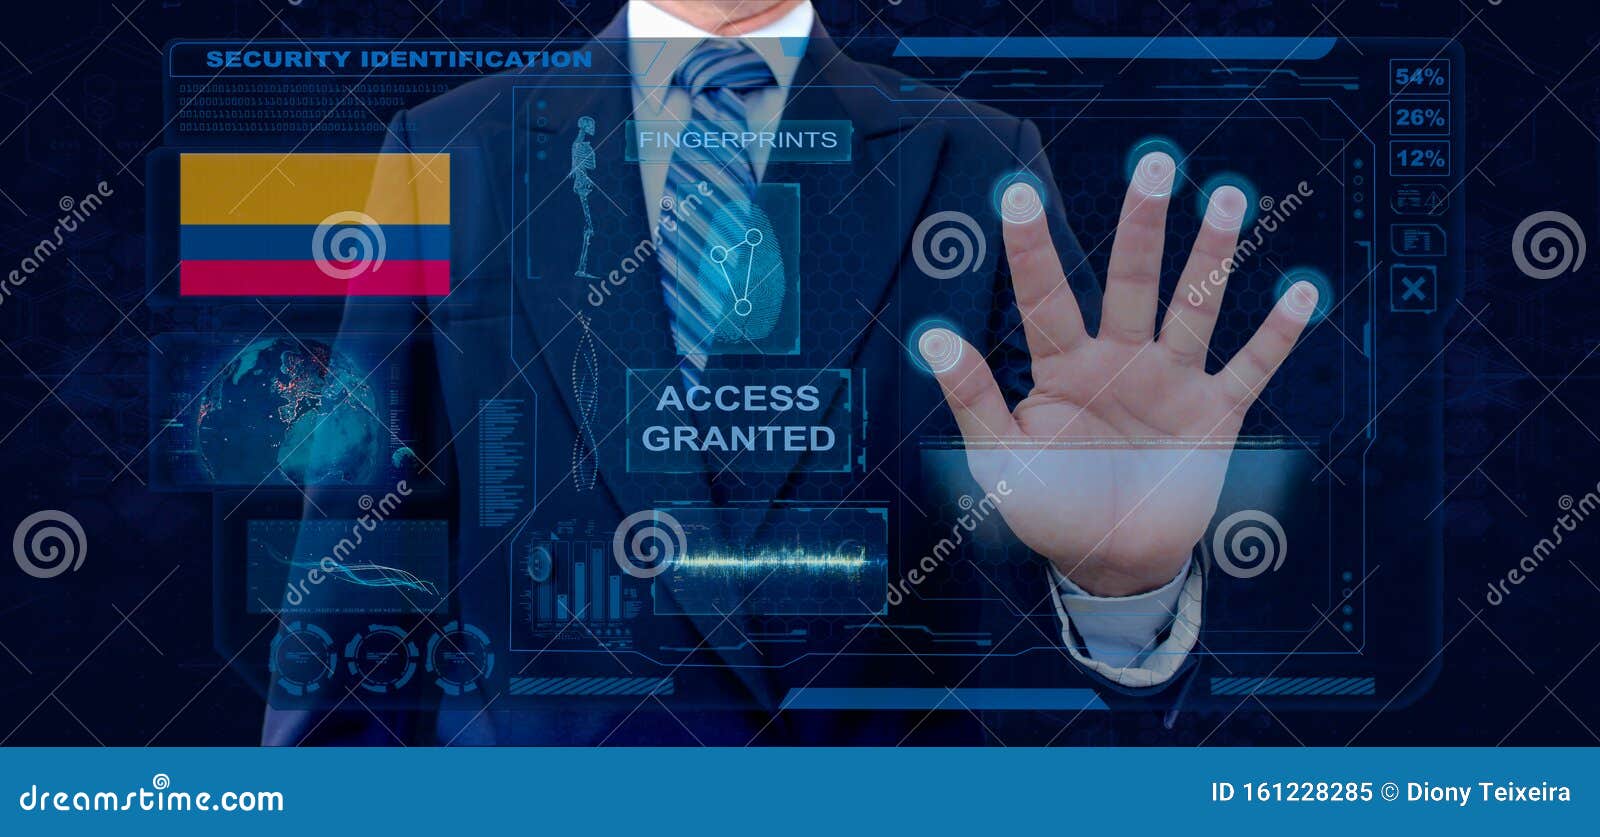 finger print biometric scanning identification system. businessman scan fingerprint biometric identity and approval. colombia